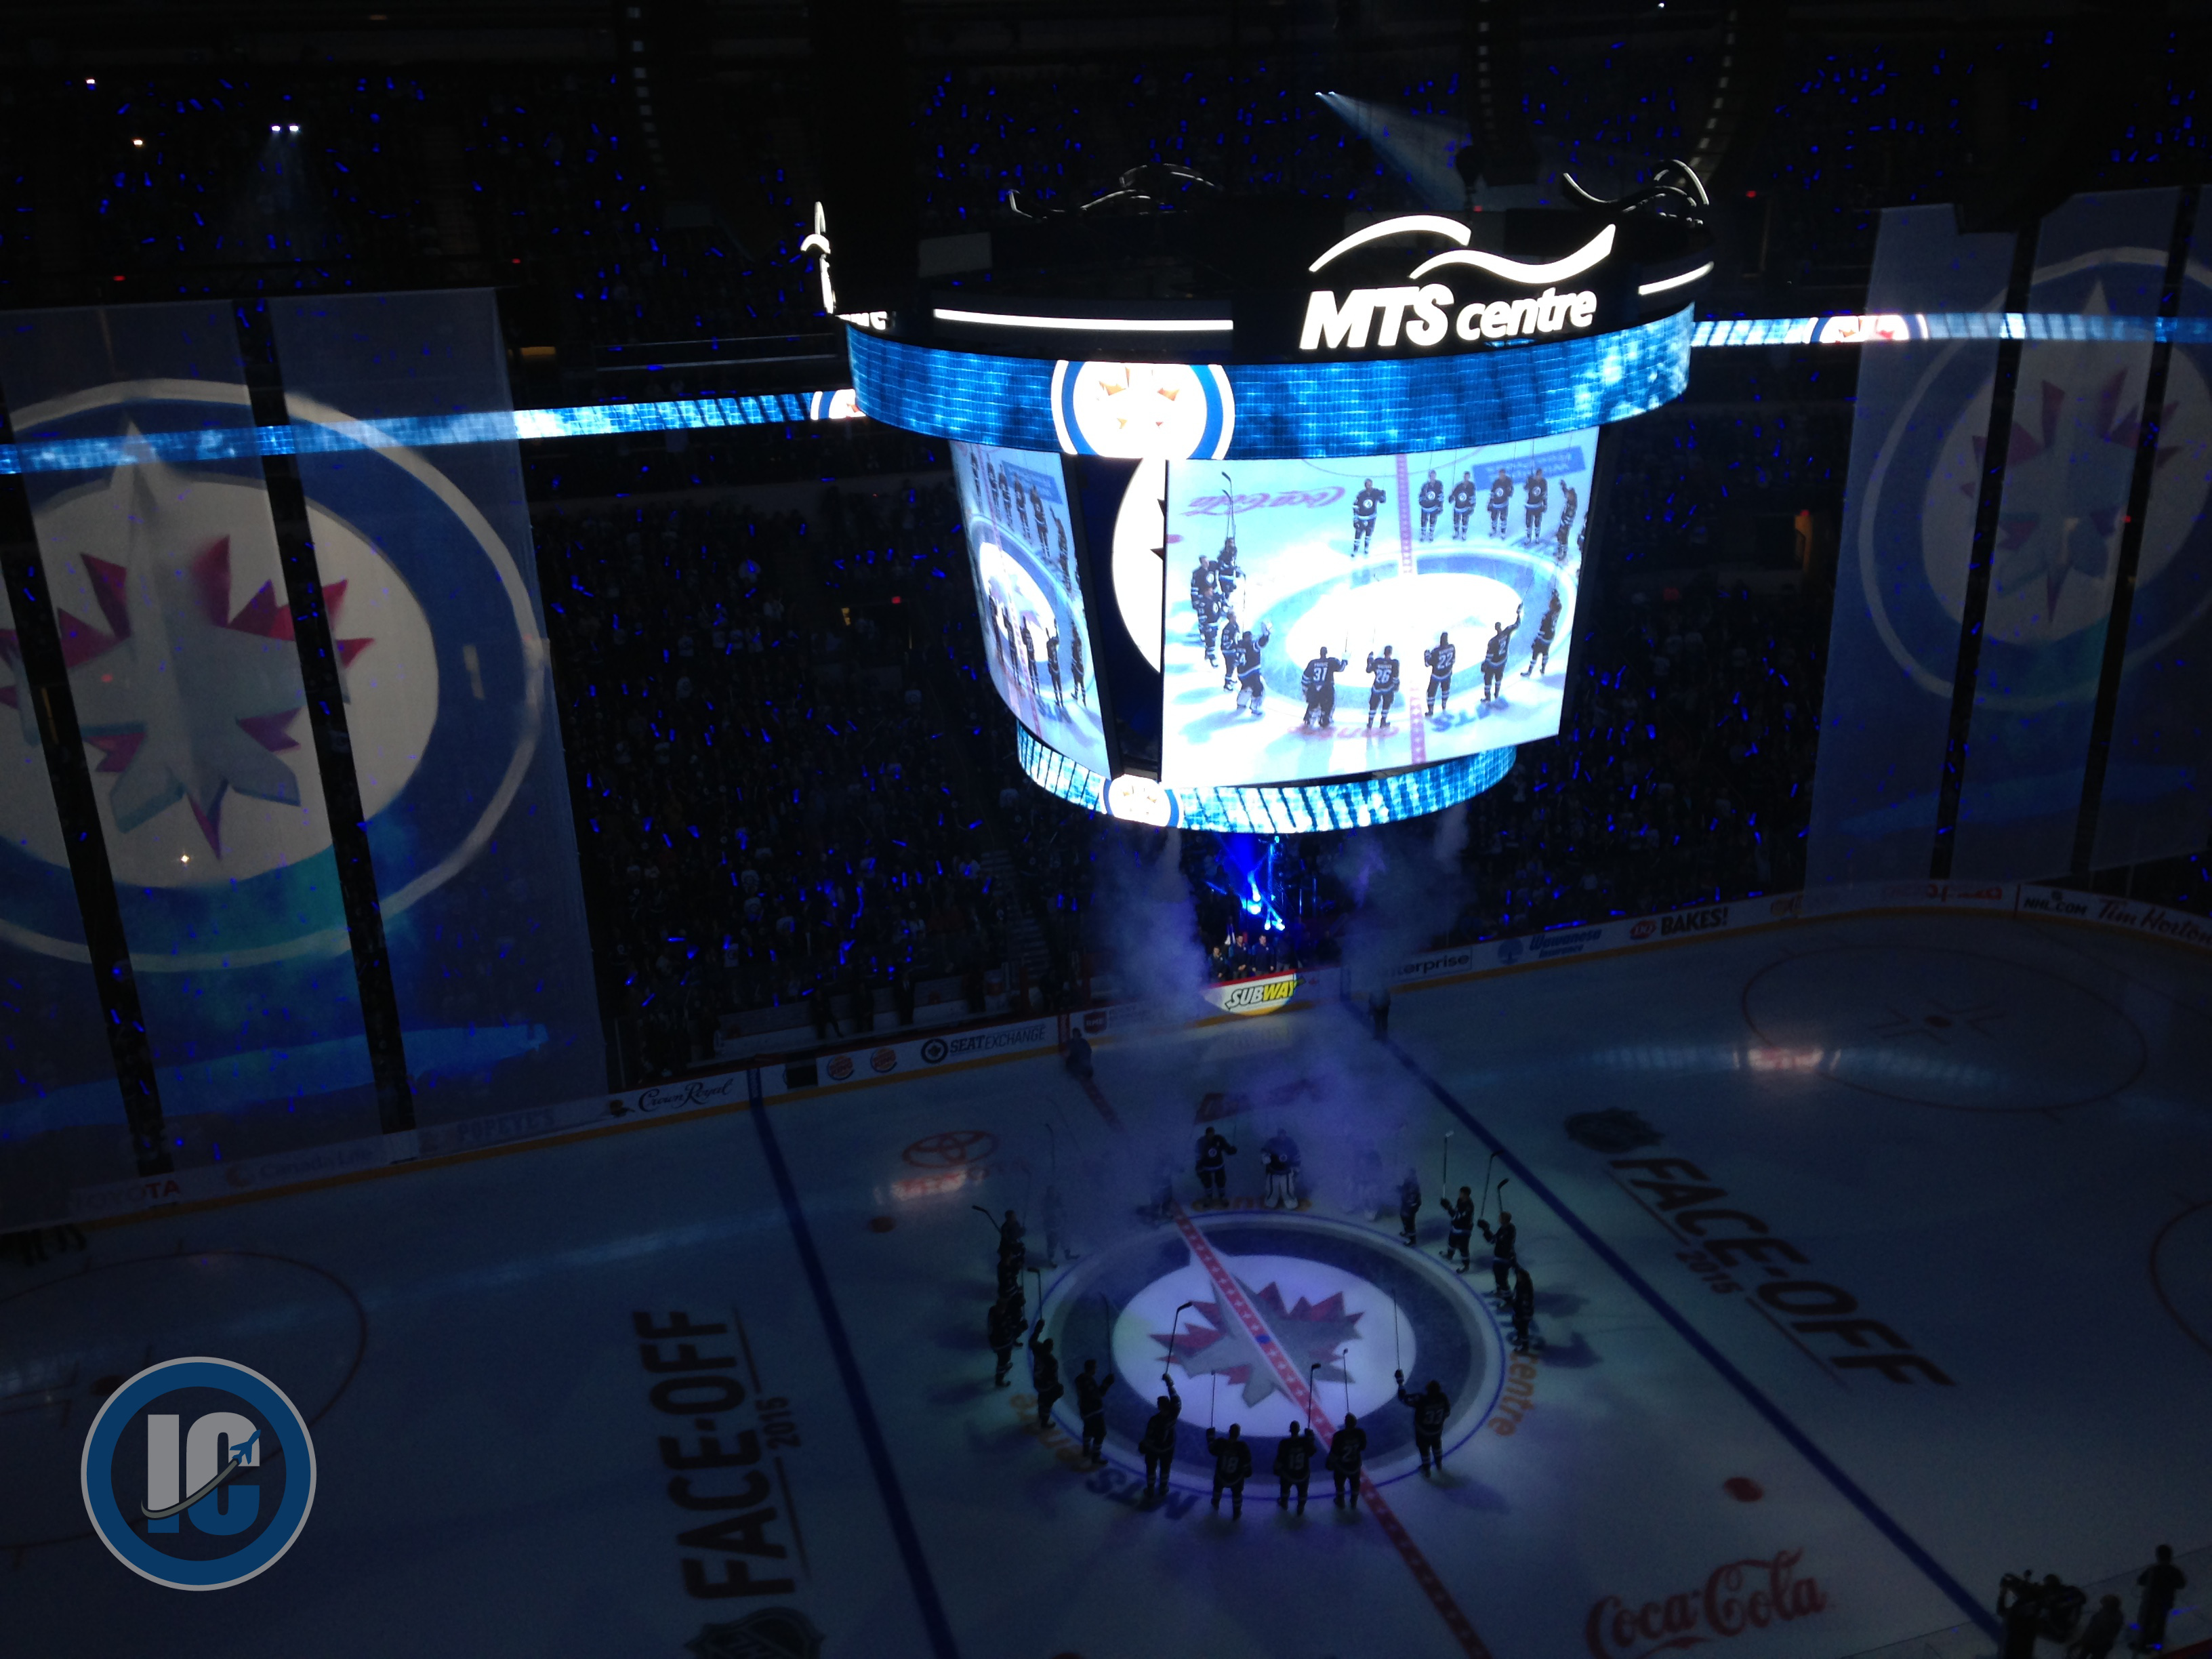 Jets players intros